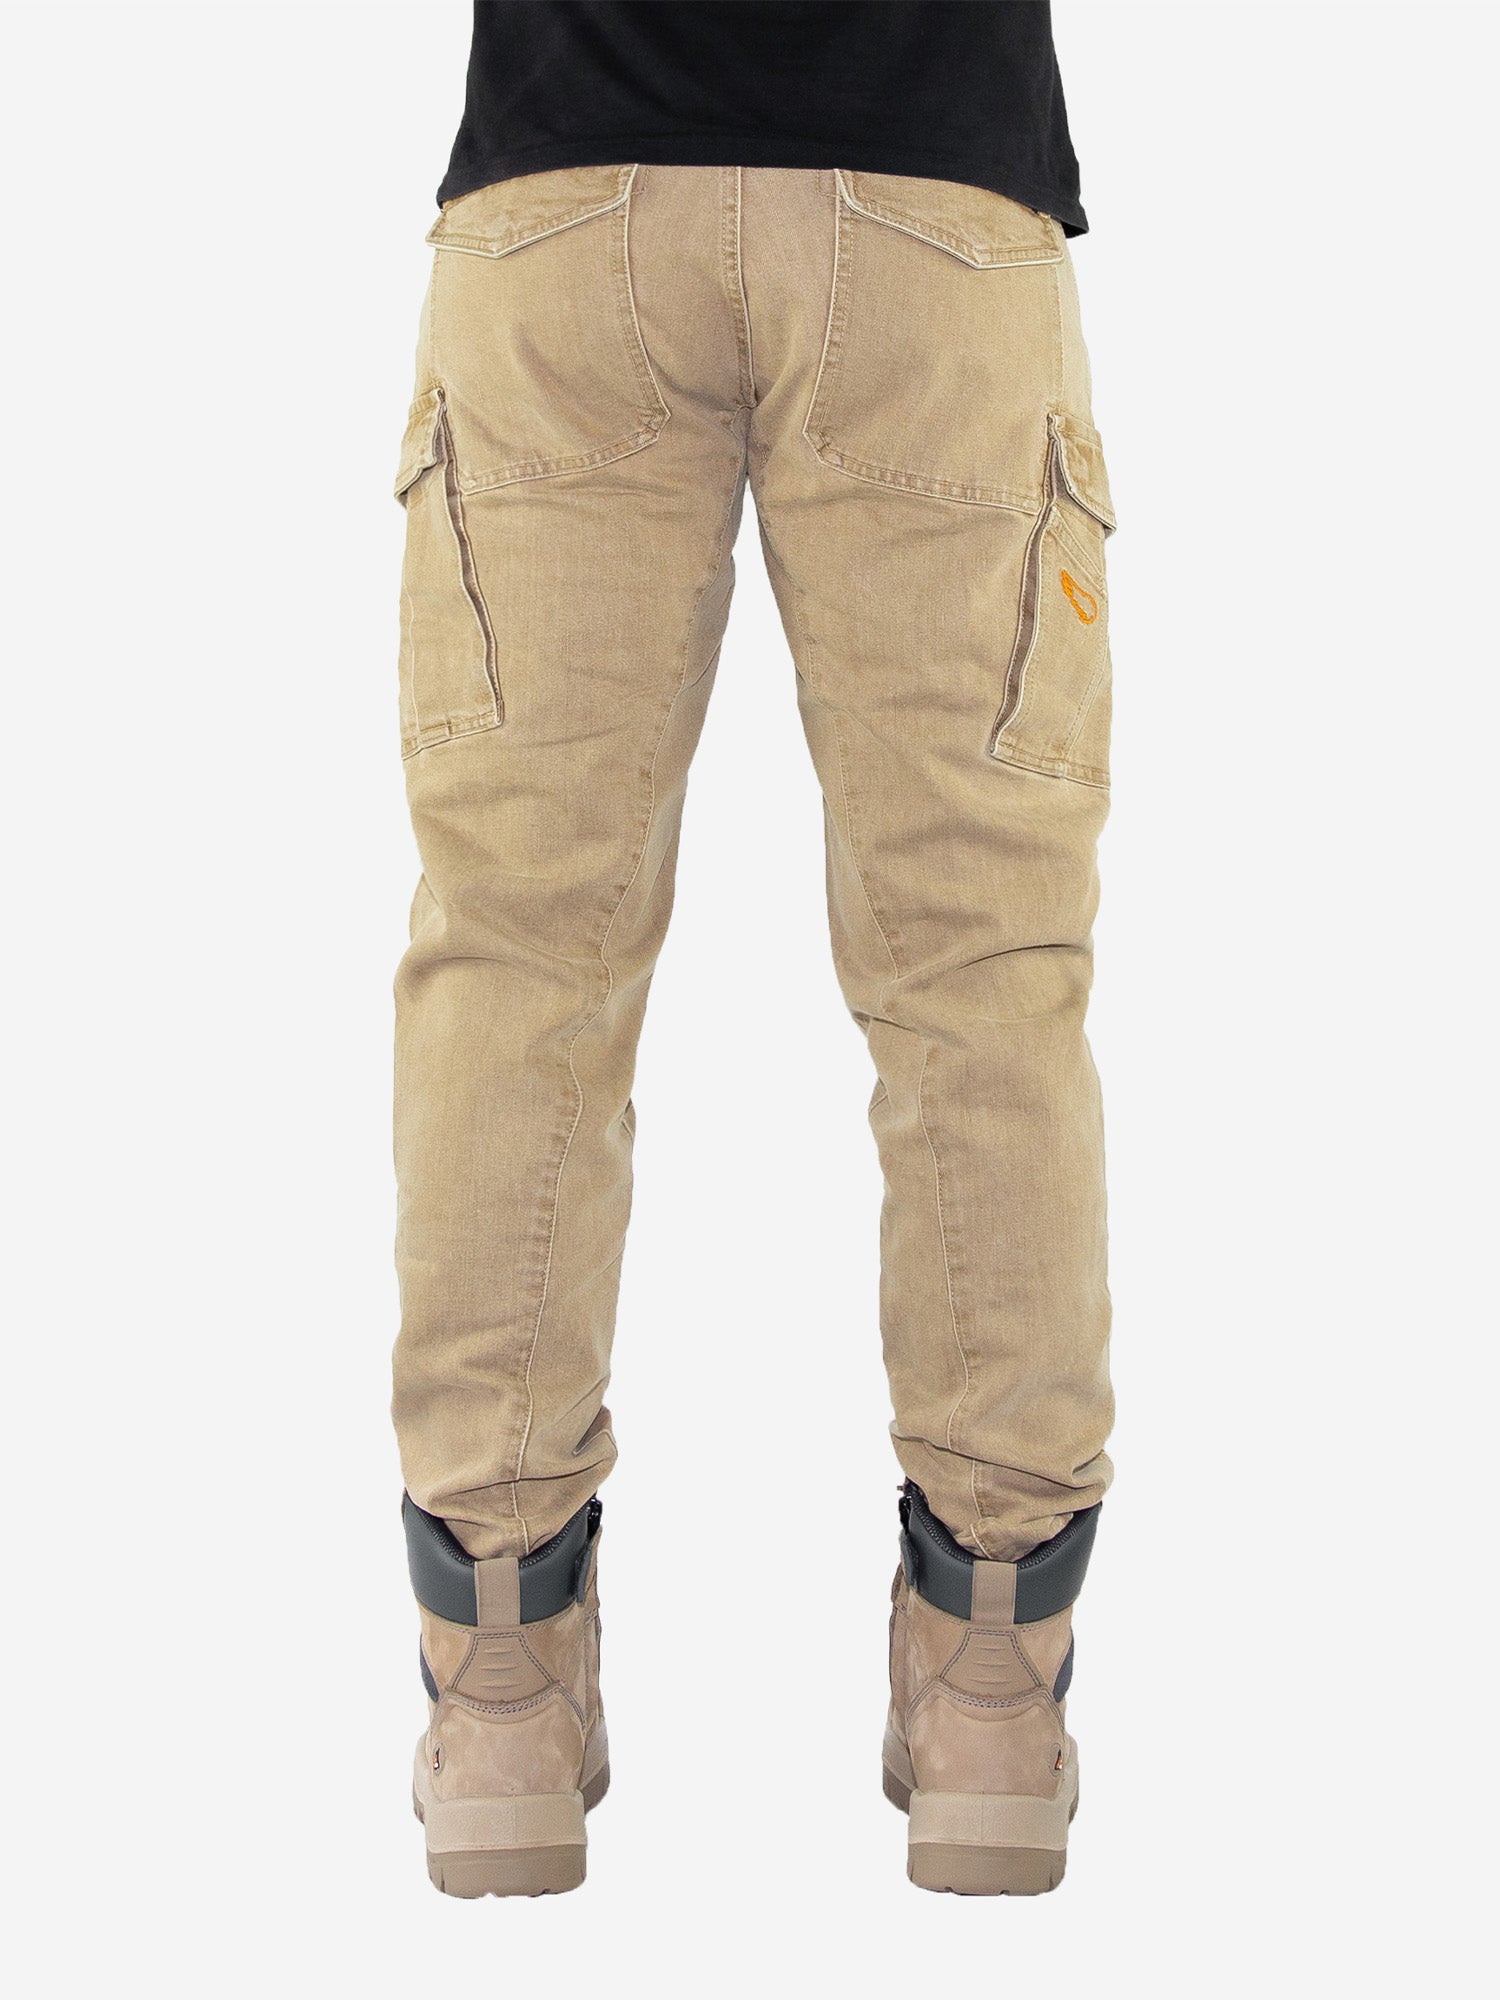 Tactical Camouflage Tactical Jeans For Men Waterproof, Multi Pockets, Ideal  For Outdoor SWAT, Combat, Military, Work And Casual Wear From Kua01, $16.35  | DHgate.Com